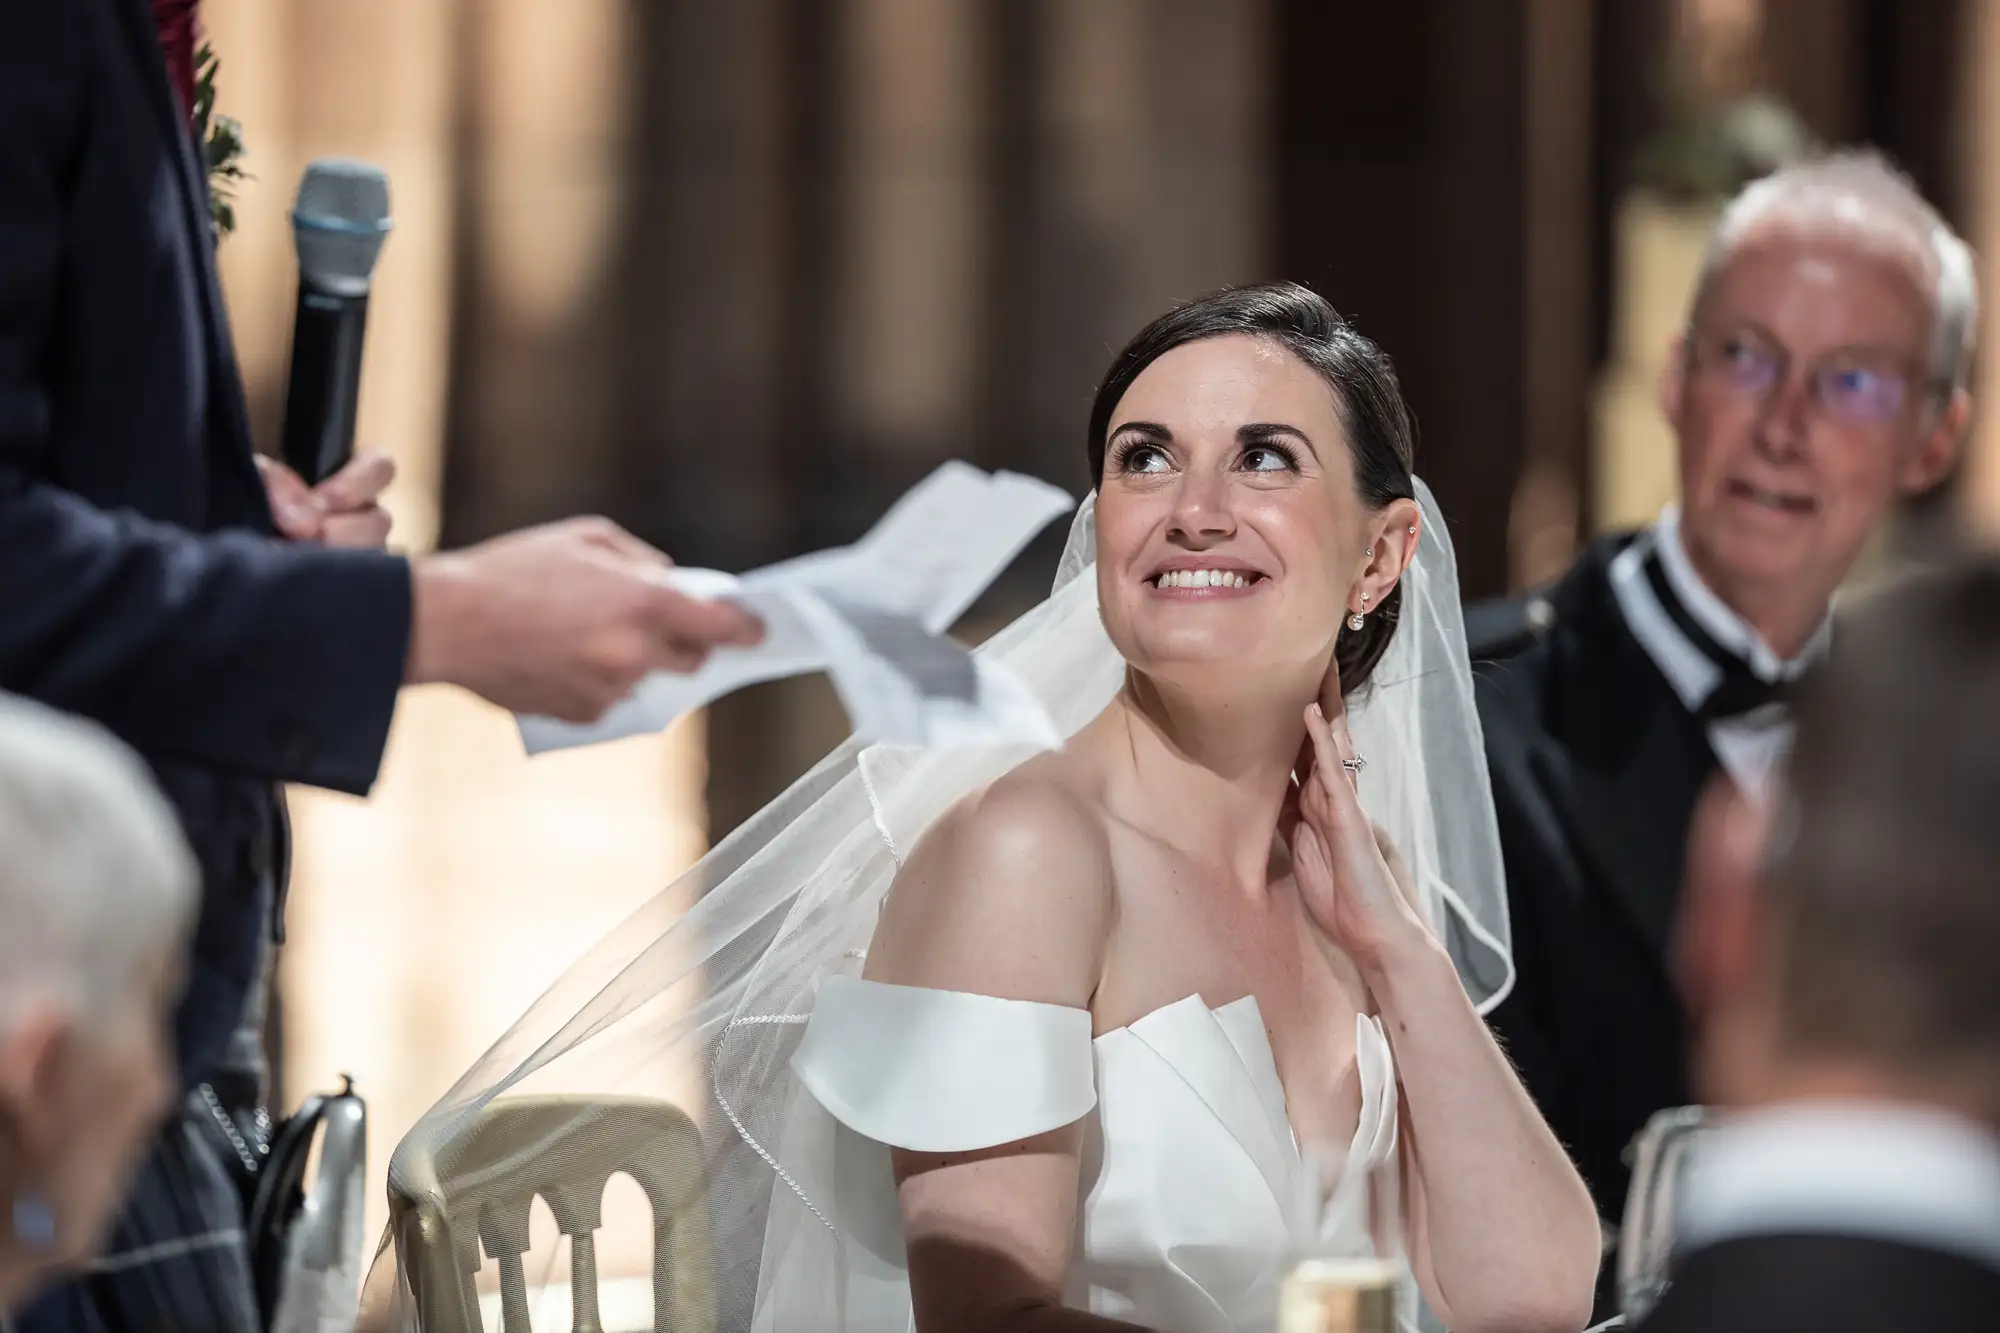 A bride, smiling joyfully, listens to a speech at her wedding reception, with guests around her and a speaker partially visible on the left.